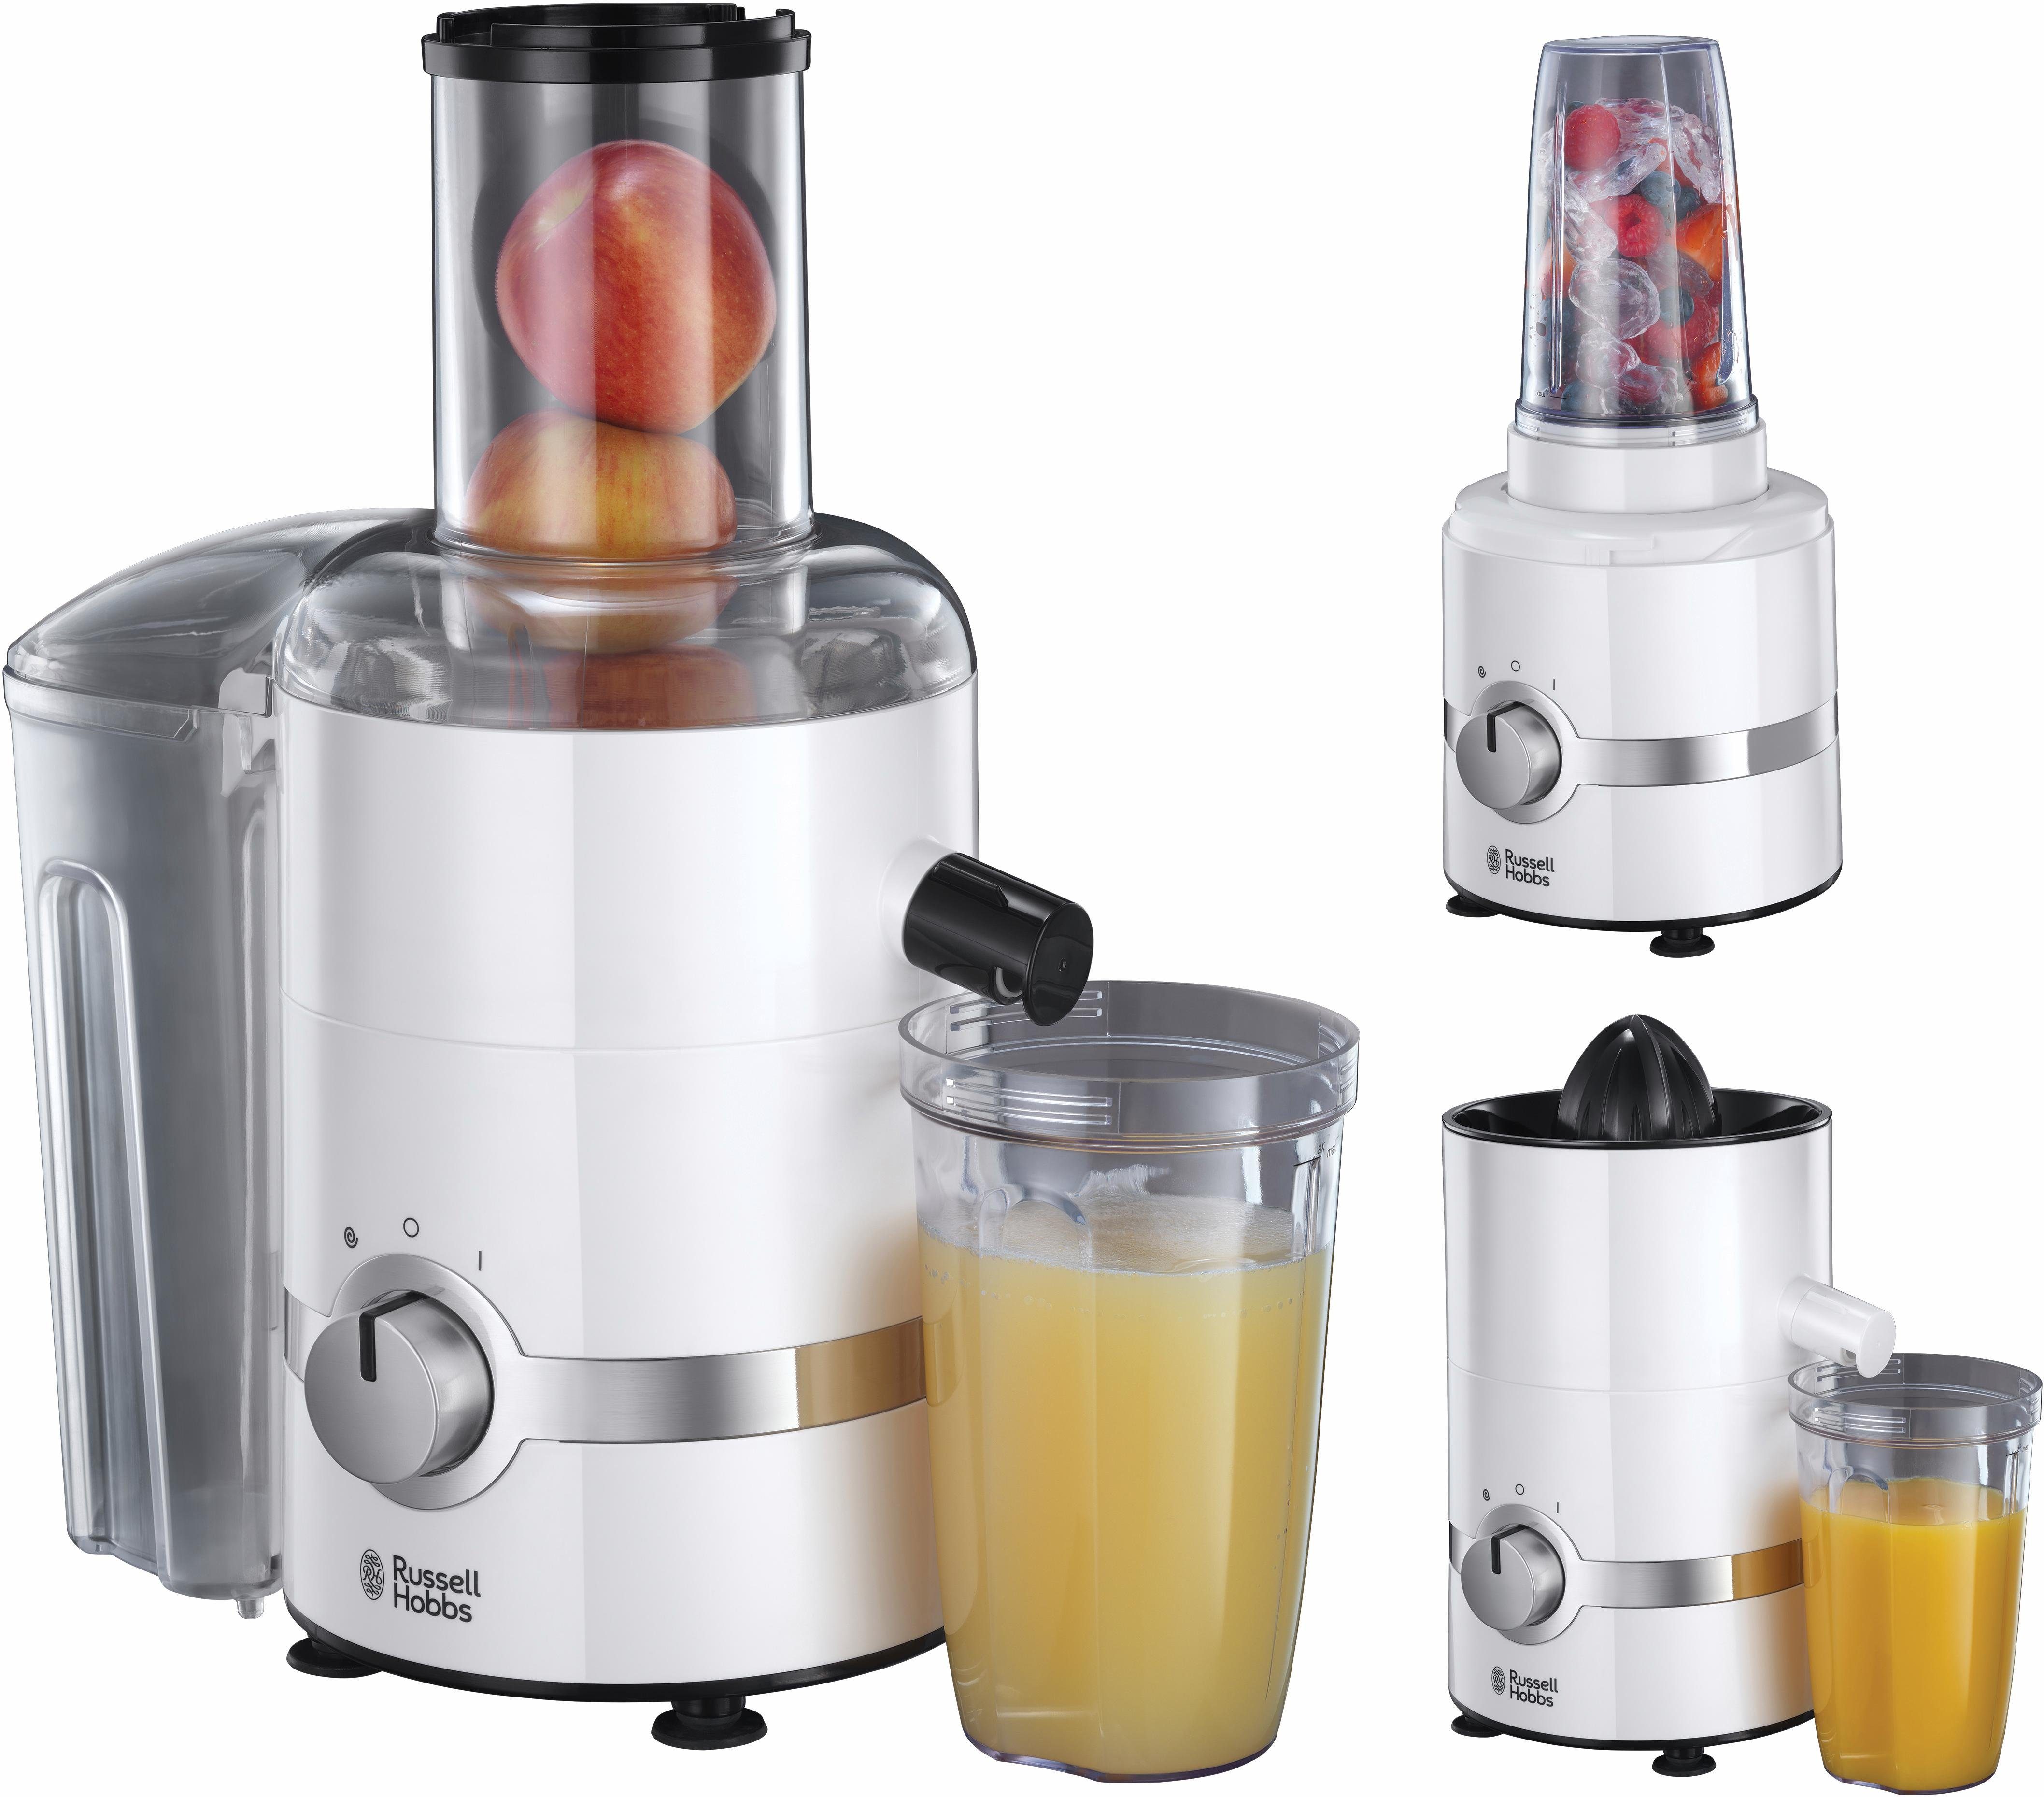 RUSSELL HOBBS Entsafter Smoothie Maker 22700-56, 800 W, 3-in-1-Gerät:  Entsafter, Zitruspresse und Smoothie Maker